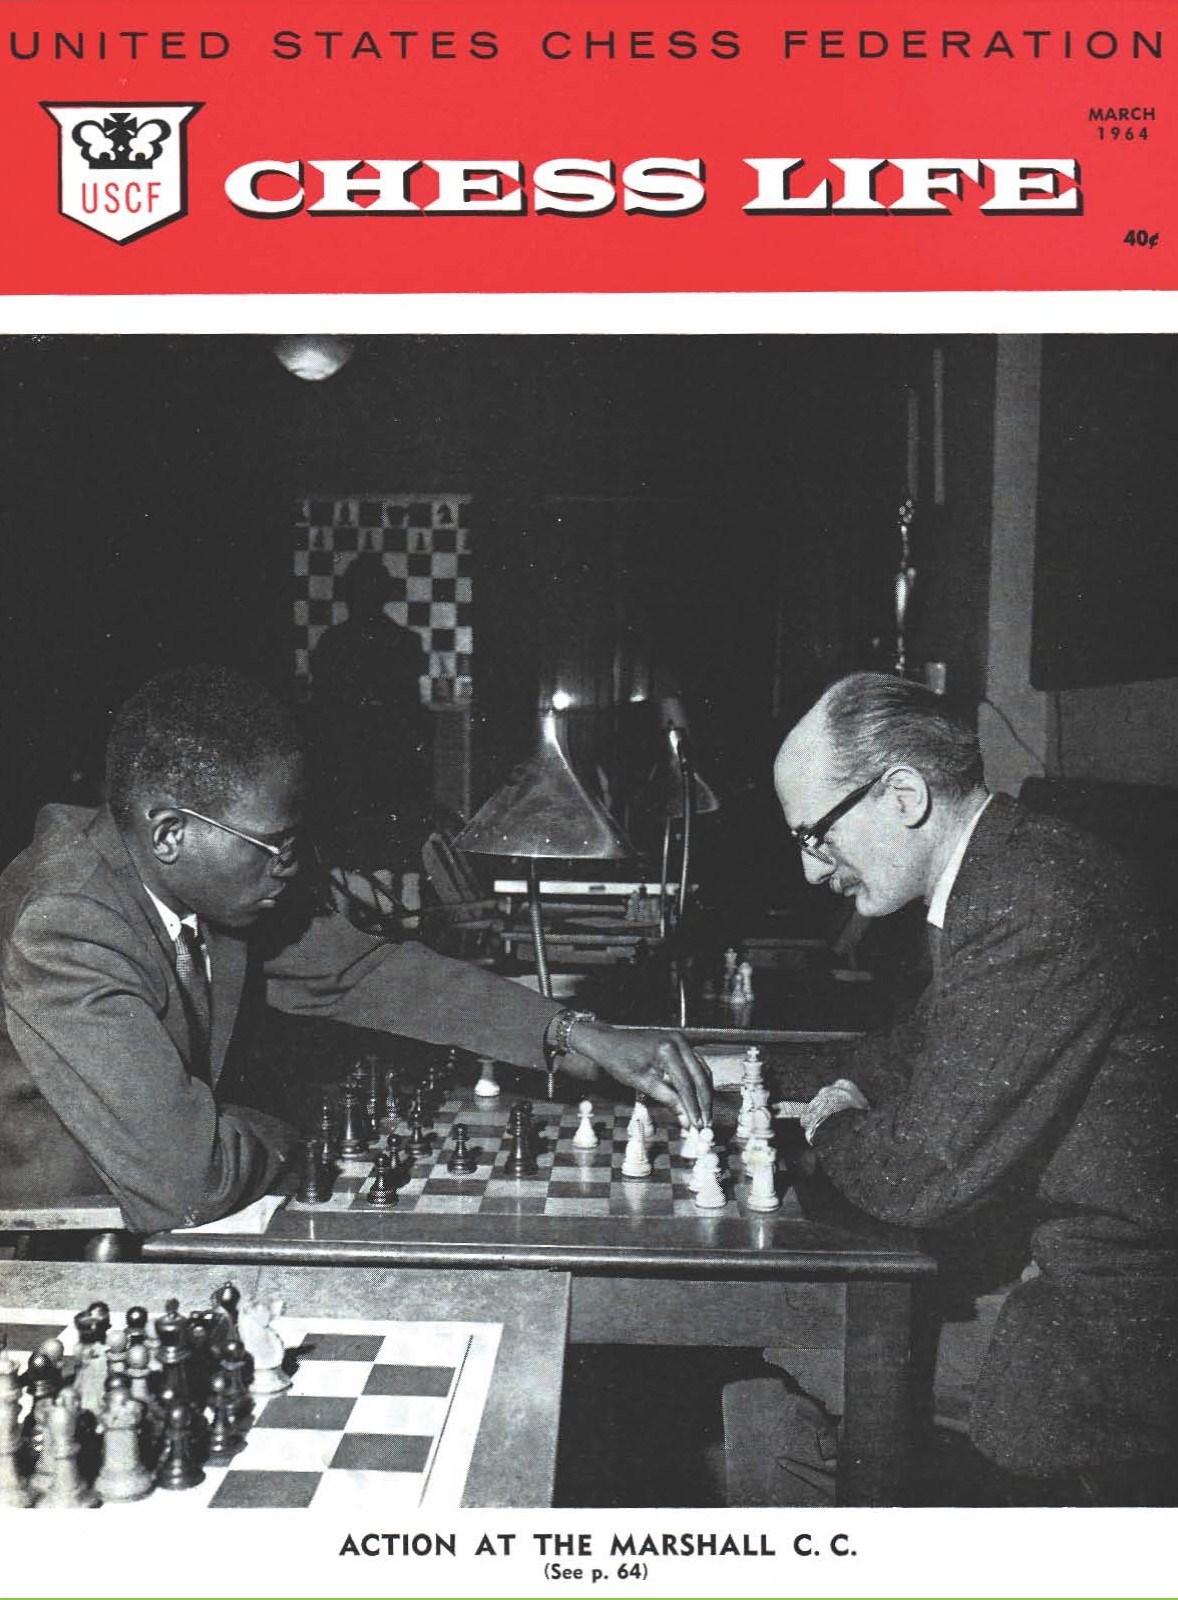 Walter Harris is shown playing William Slater at the Marshall Chess Club in 1964. The caption identified Harris as the first 